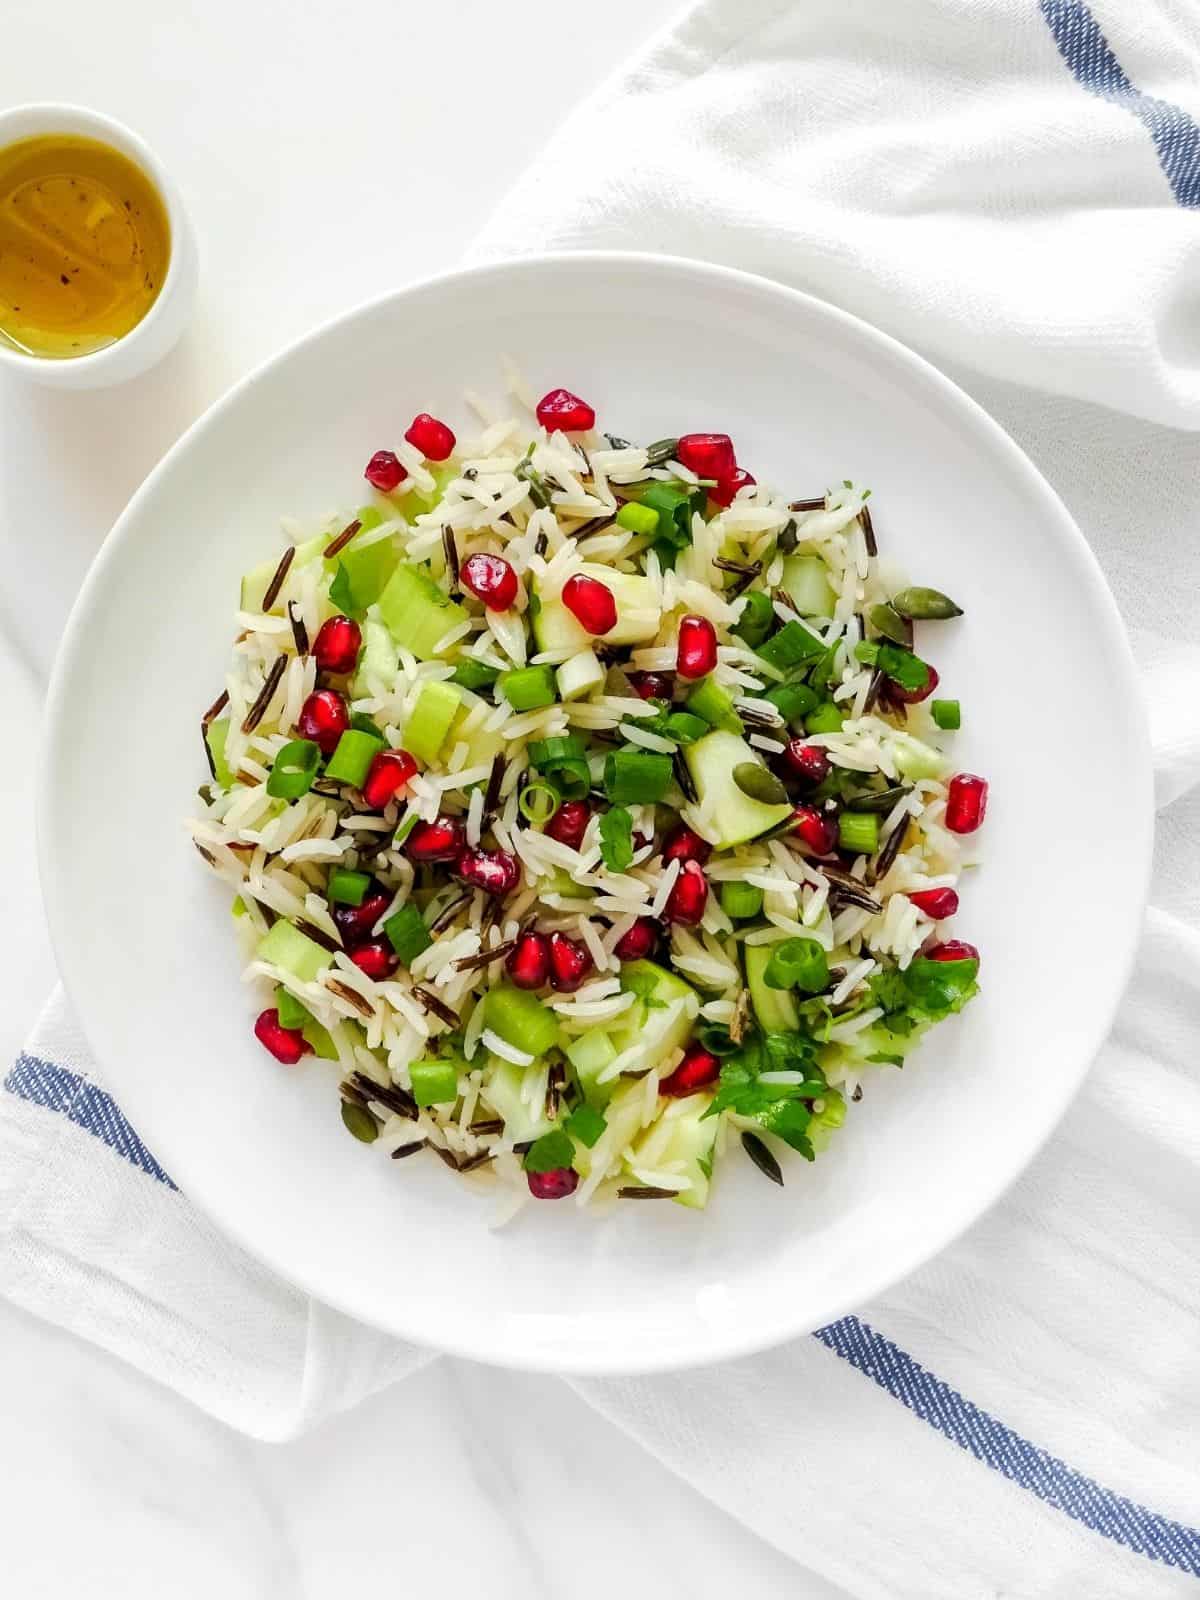 summer wild rice salad with pomegranate seeds on a white plate with a small bowl of dressing next to it.